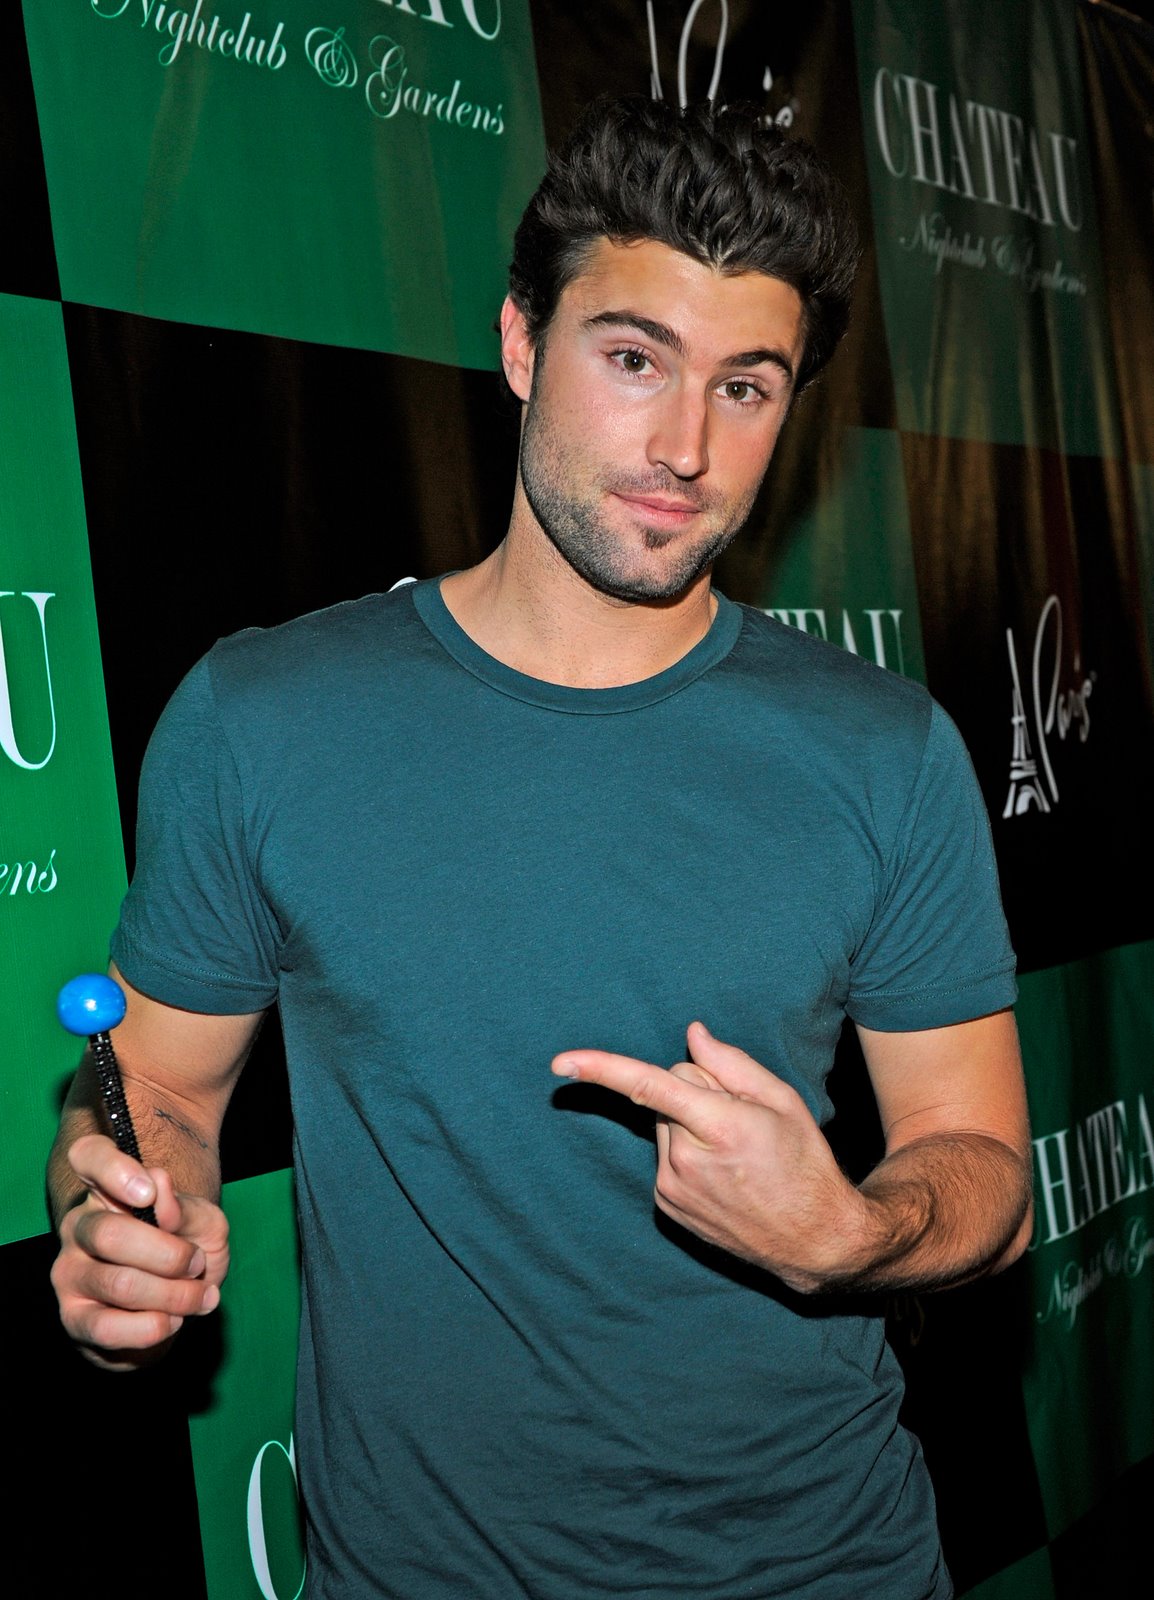 BRODY JENNER: Post 7: Hot and Well Hung Kardashian Step brother.